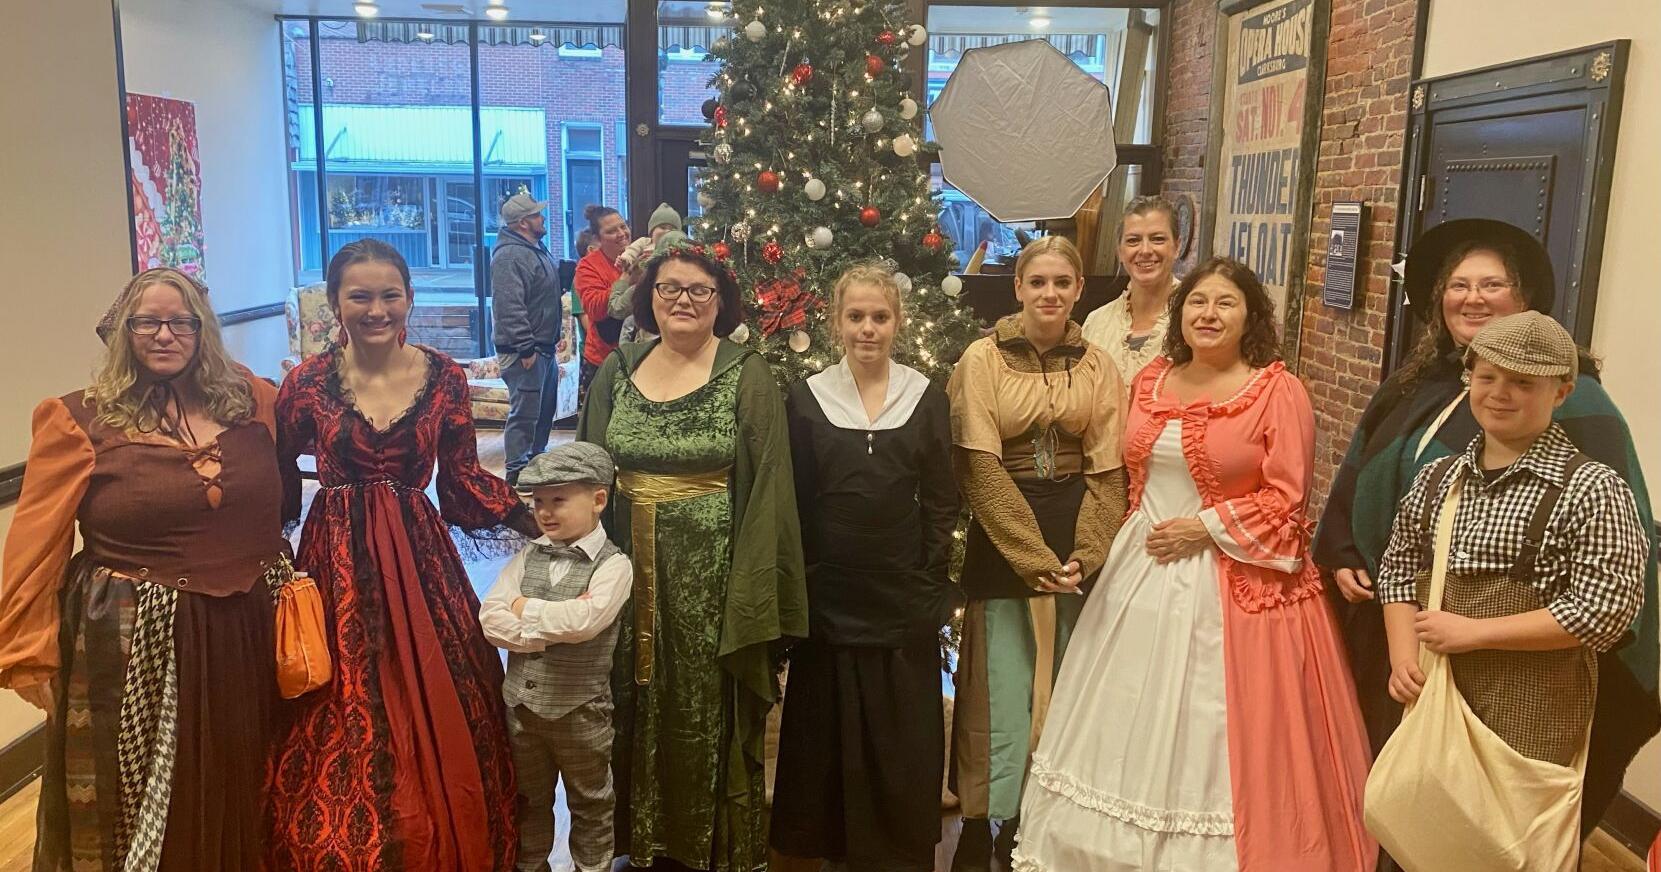 West Virginia Dickens Christmas Festival and Faire kicks off with fund-raising breakfast, photo opportunity